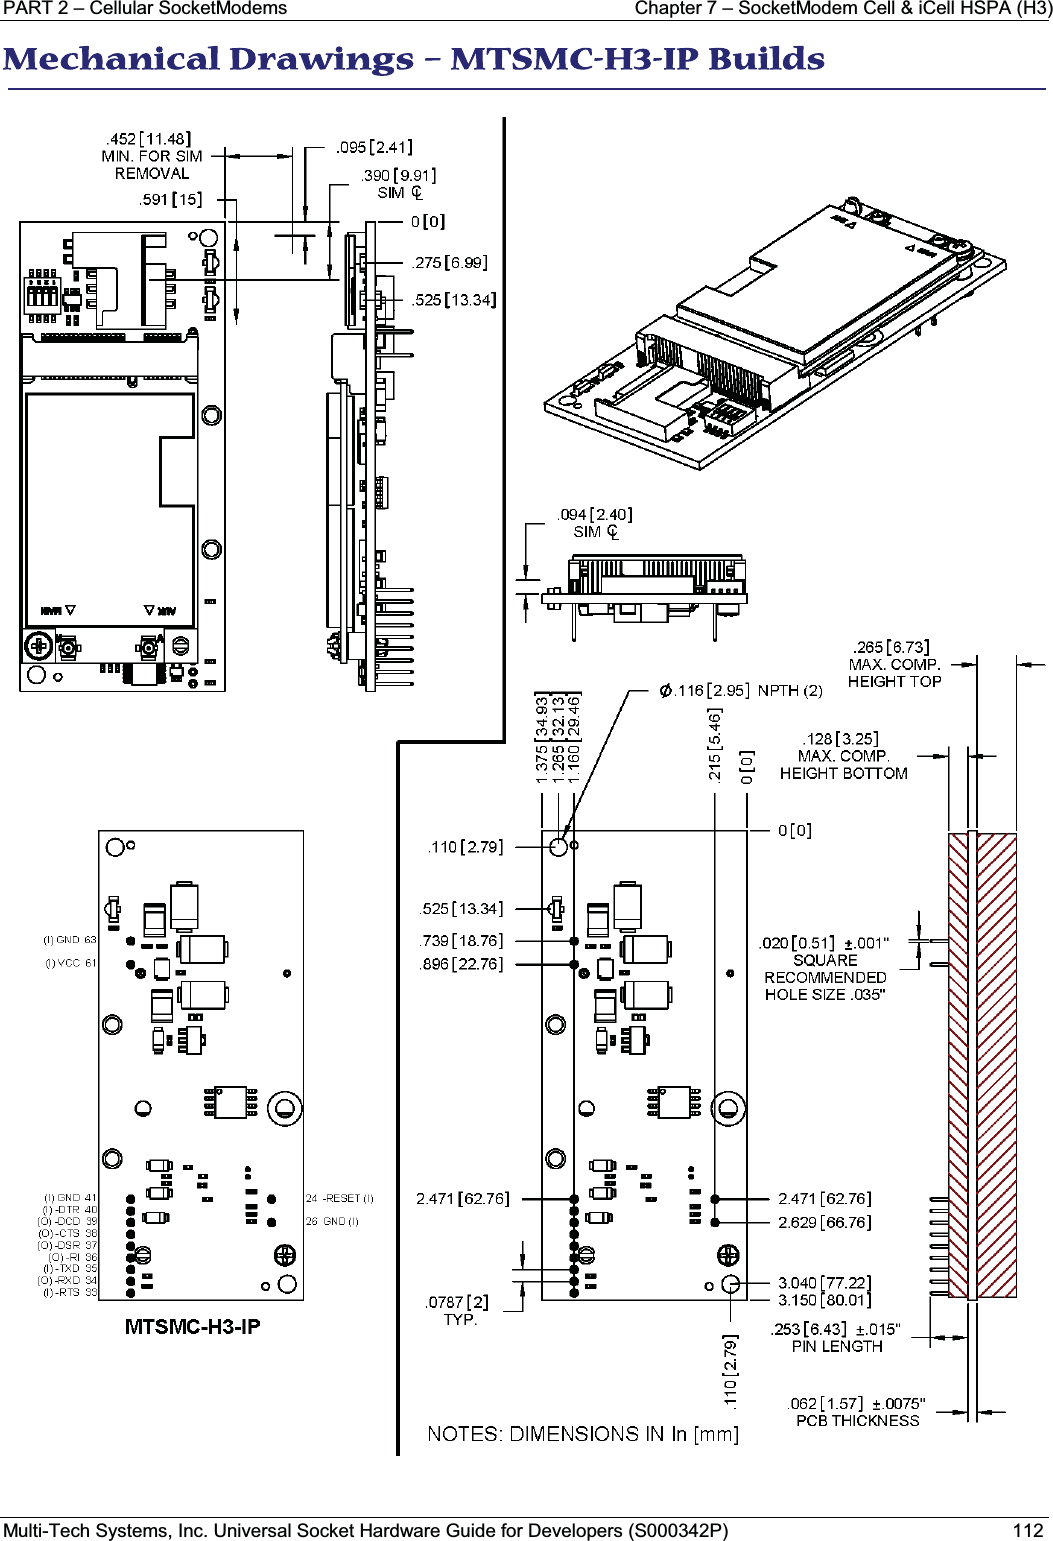 PART 2 – Cellular SocketModems Chapter 7 – SocketModem Cell &amp; iCell HSPA (H3)Multi-Tech Systems, Inc. Universal Socket Hardware Guide for Developers (S000342P) 112MMechanical Drawings – MTSMC-H3-IP Builds 